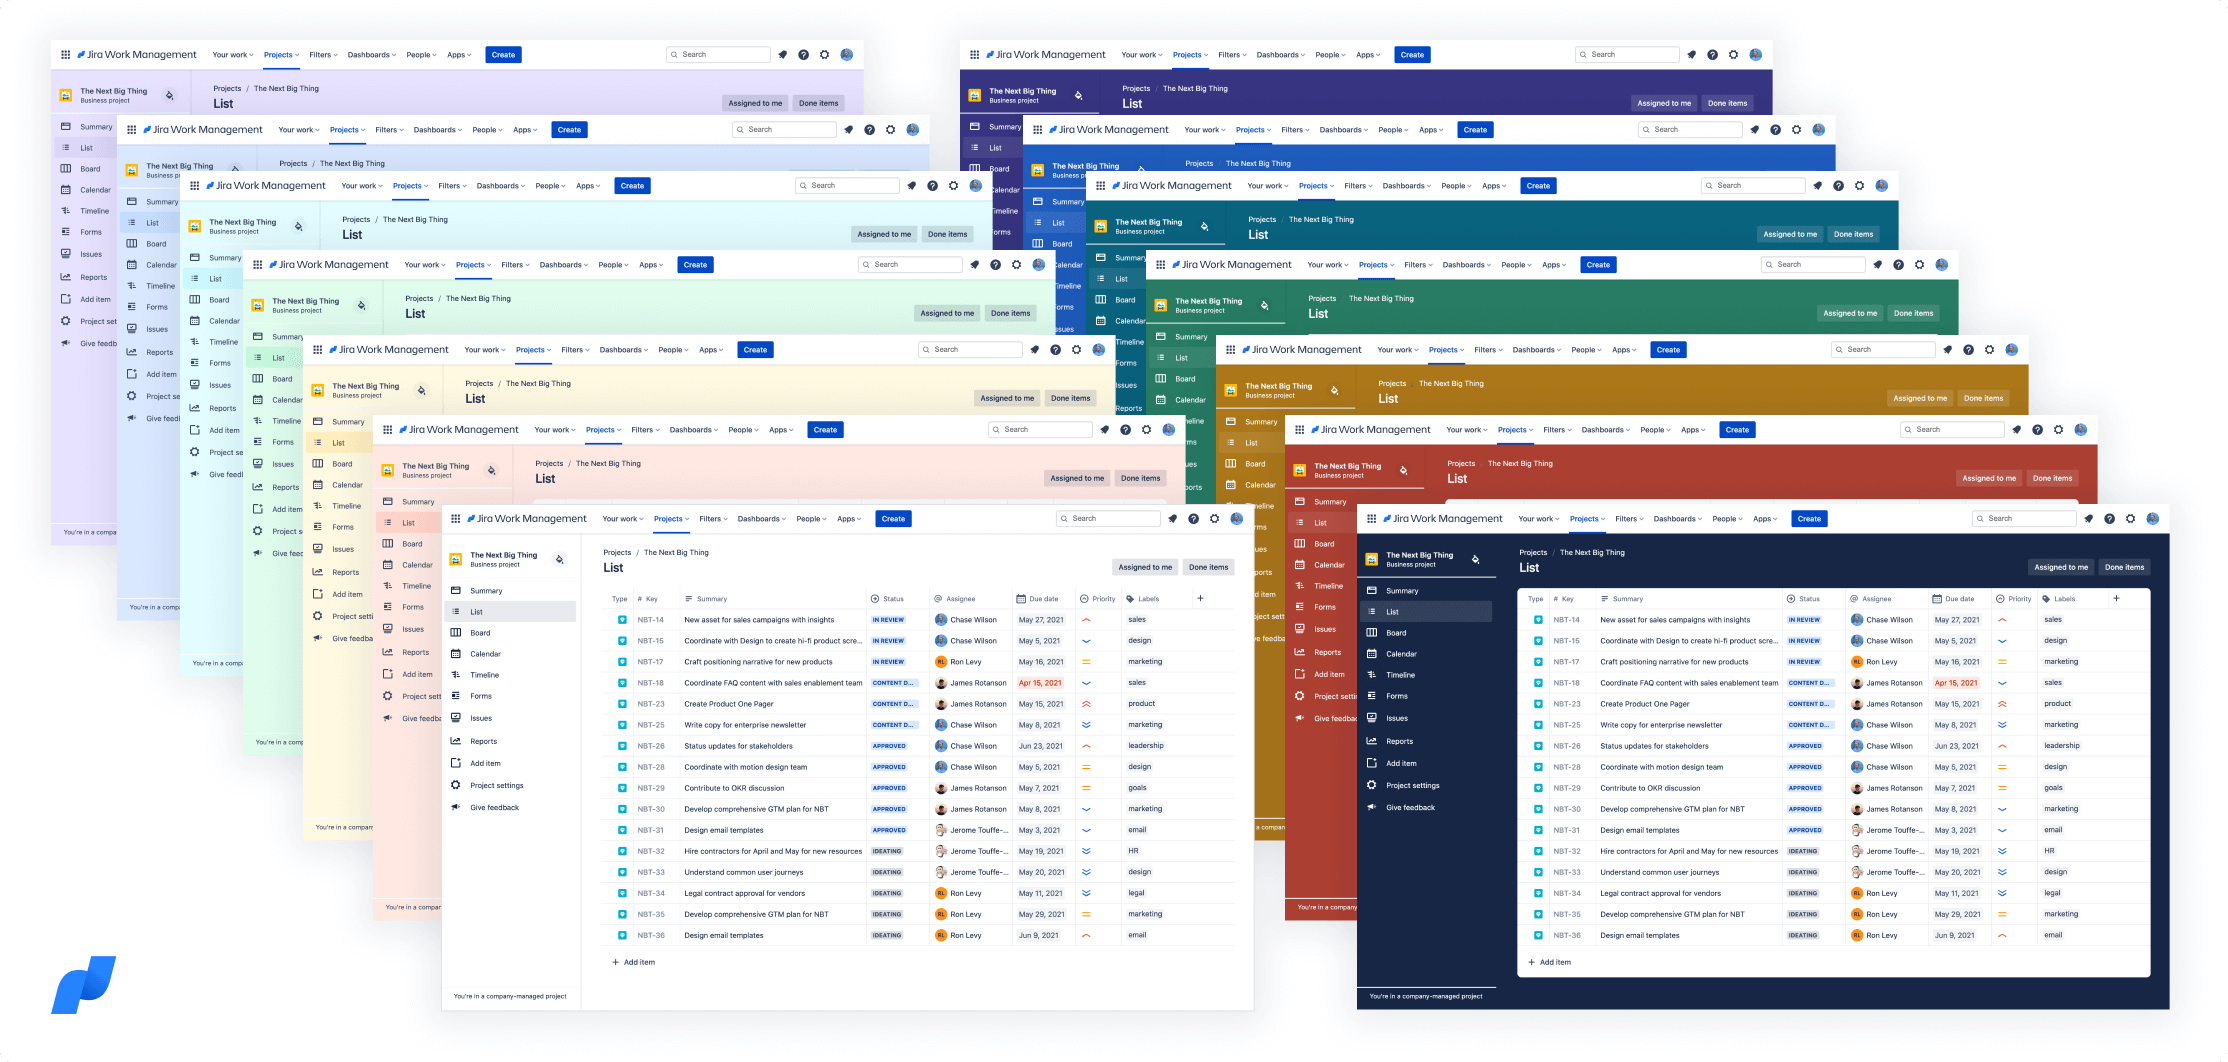 The image depicts samples of the 14 colors available for projects in Jira Work Management.